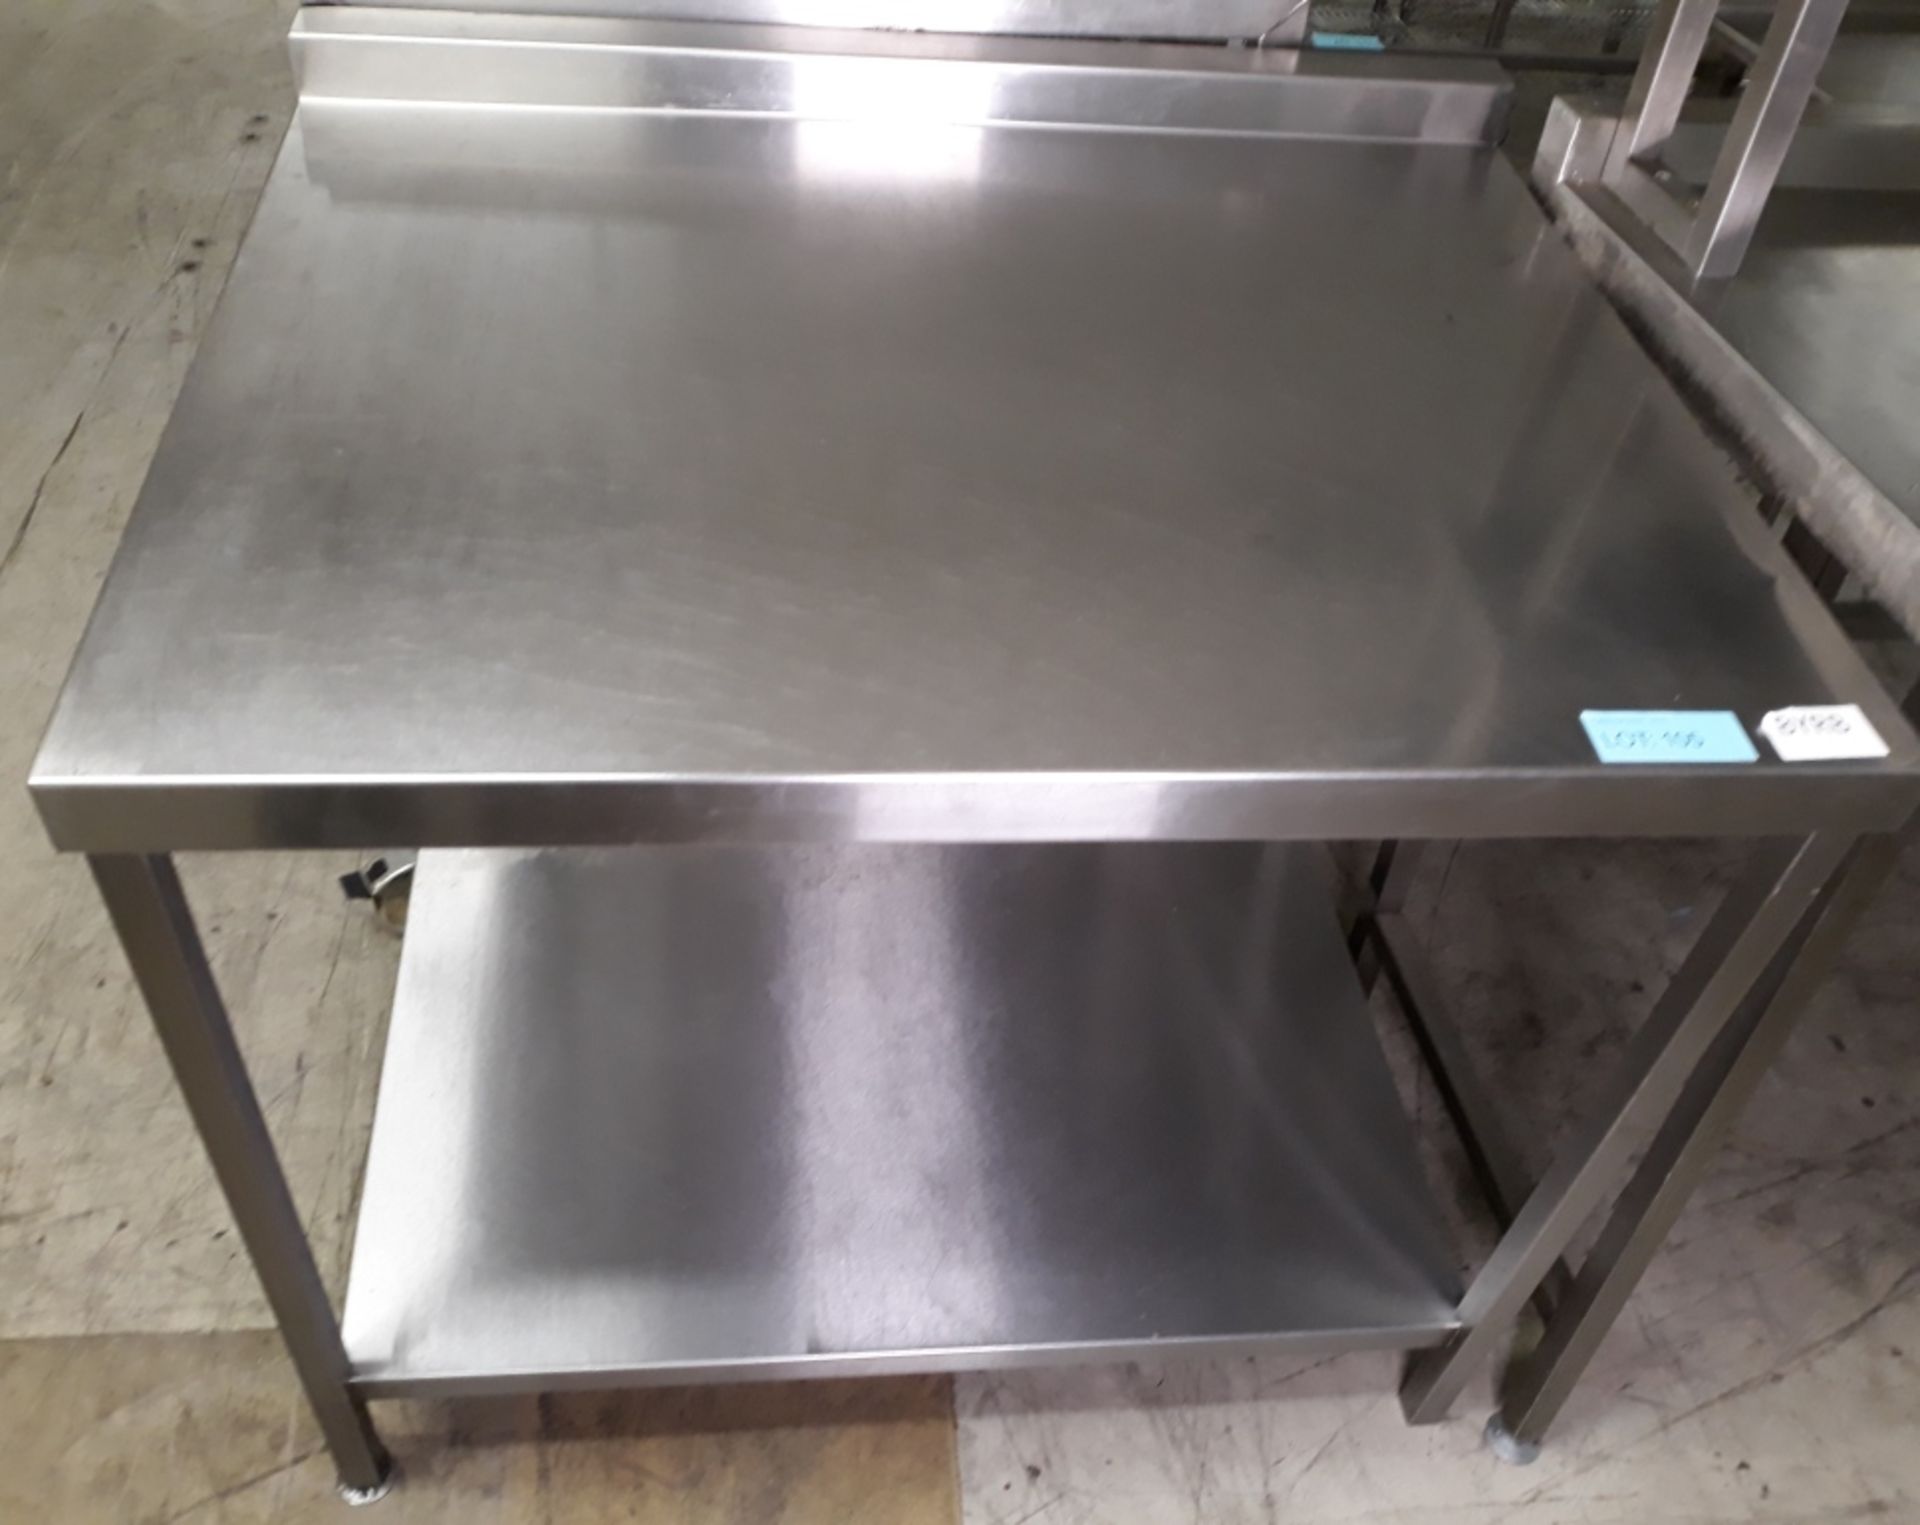 Stainless steel table - 89 x 80cm.